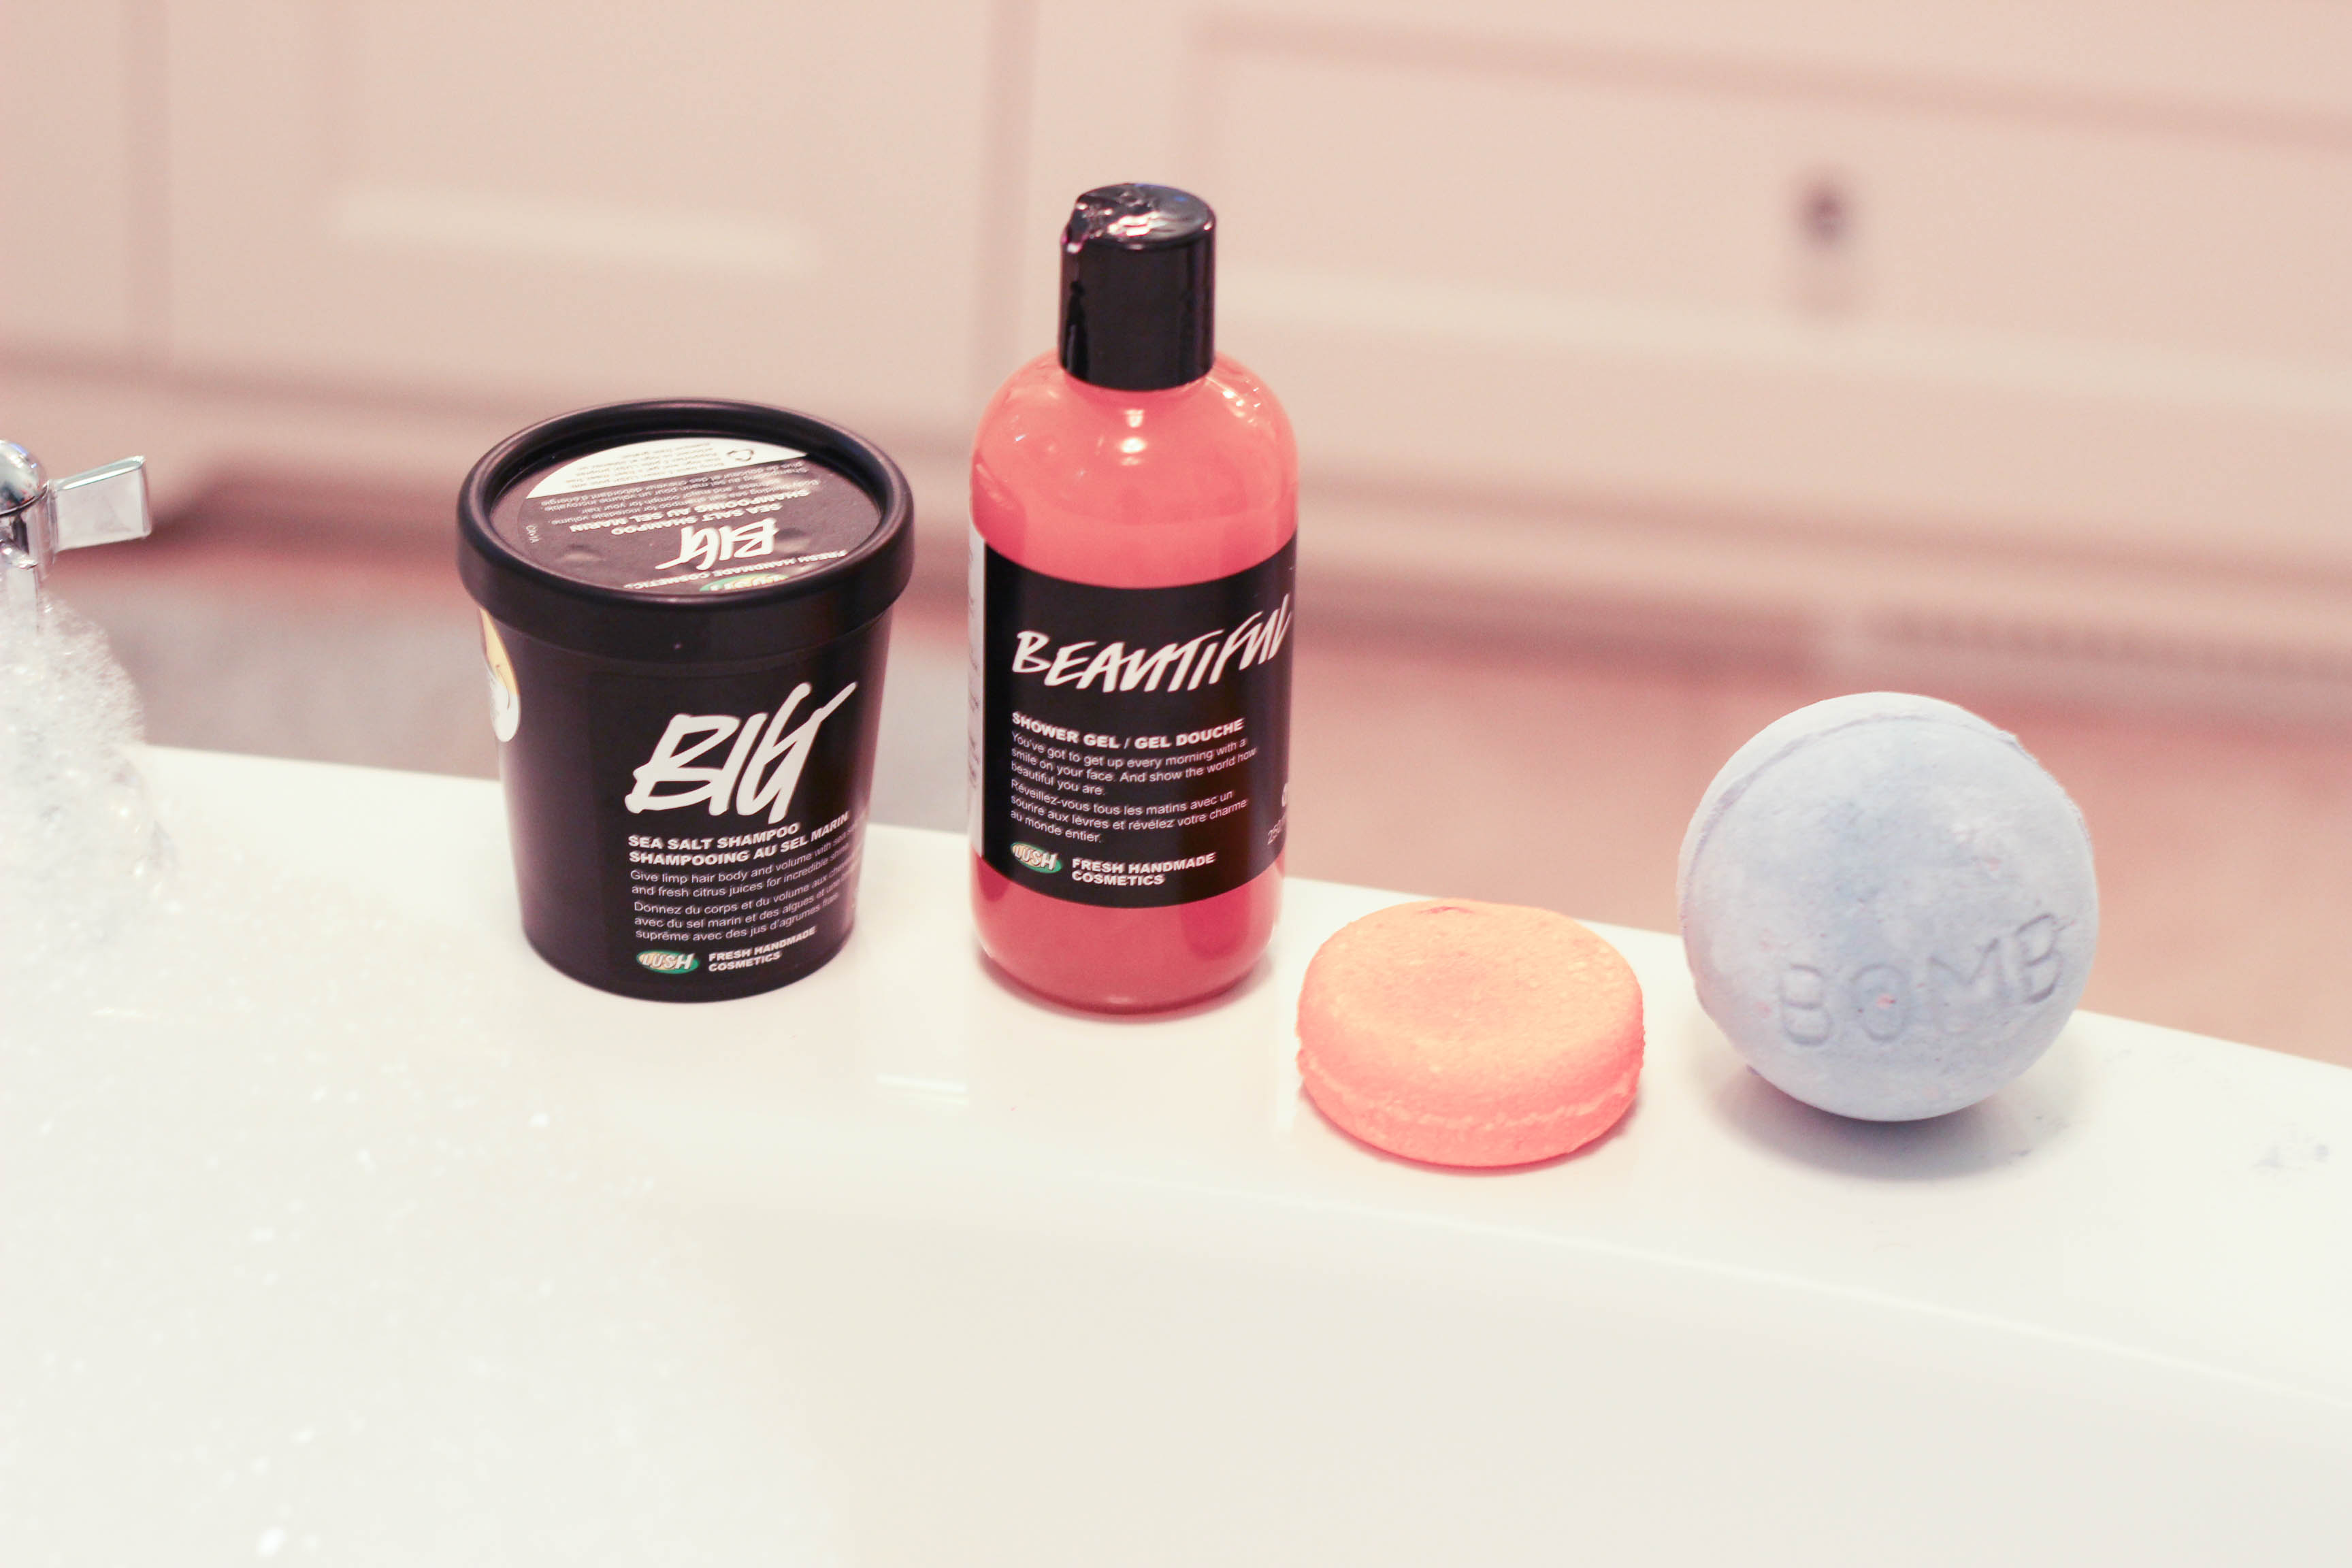 At Home with Lush Cosmetics